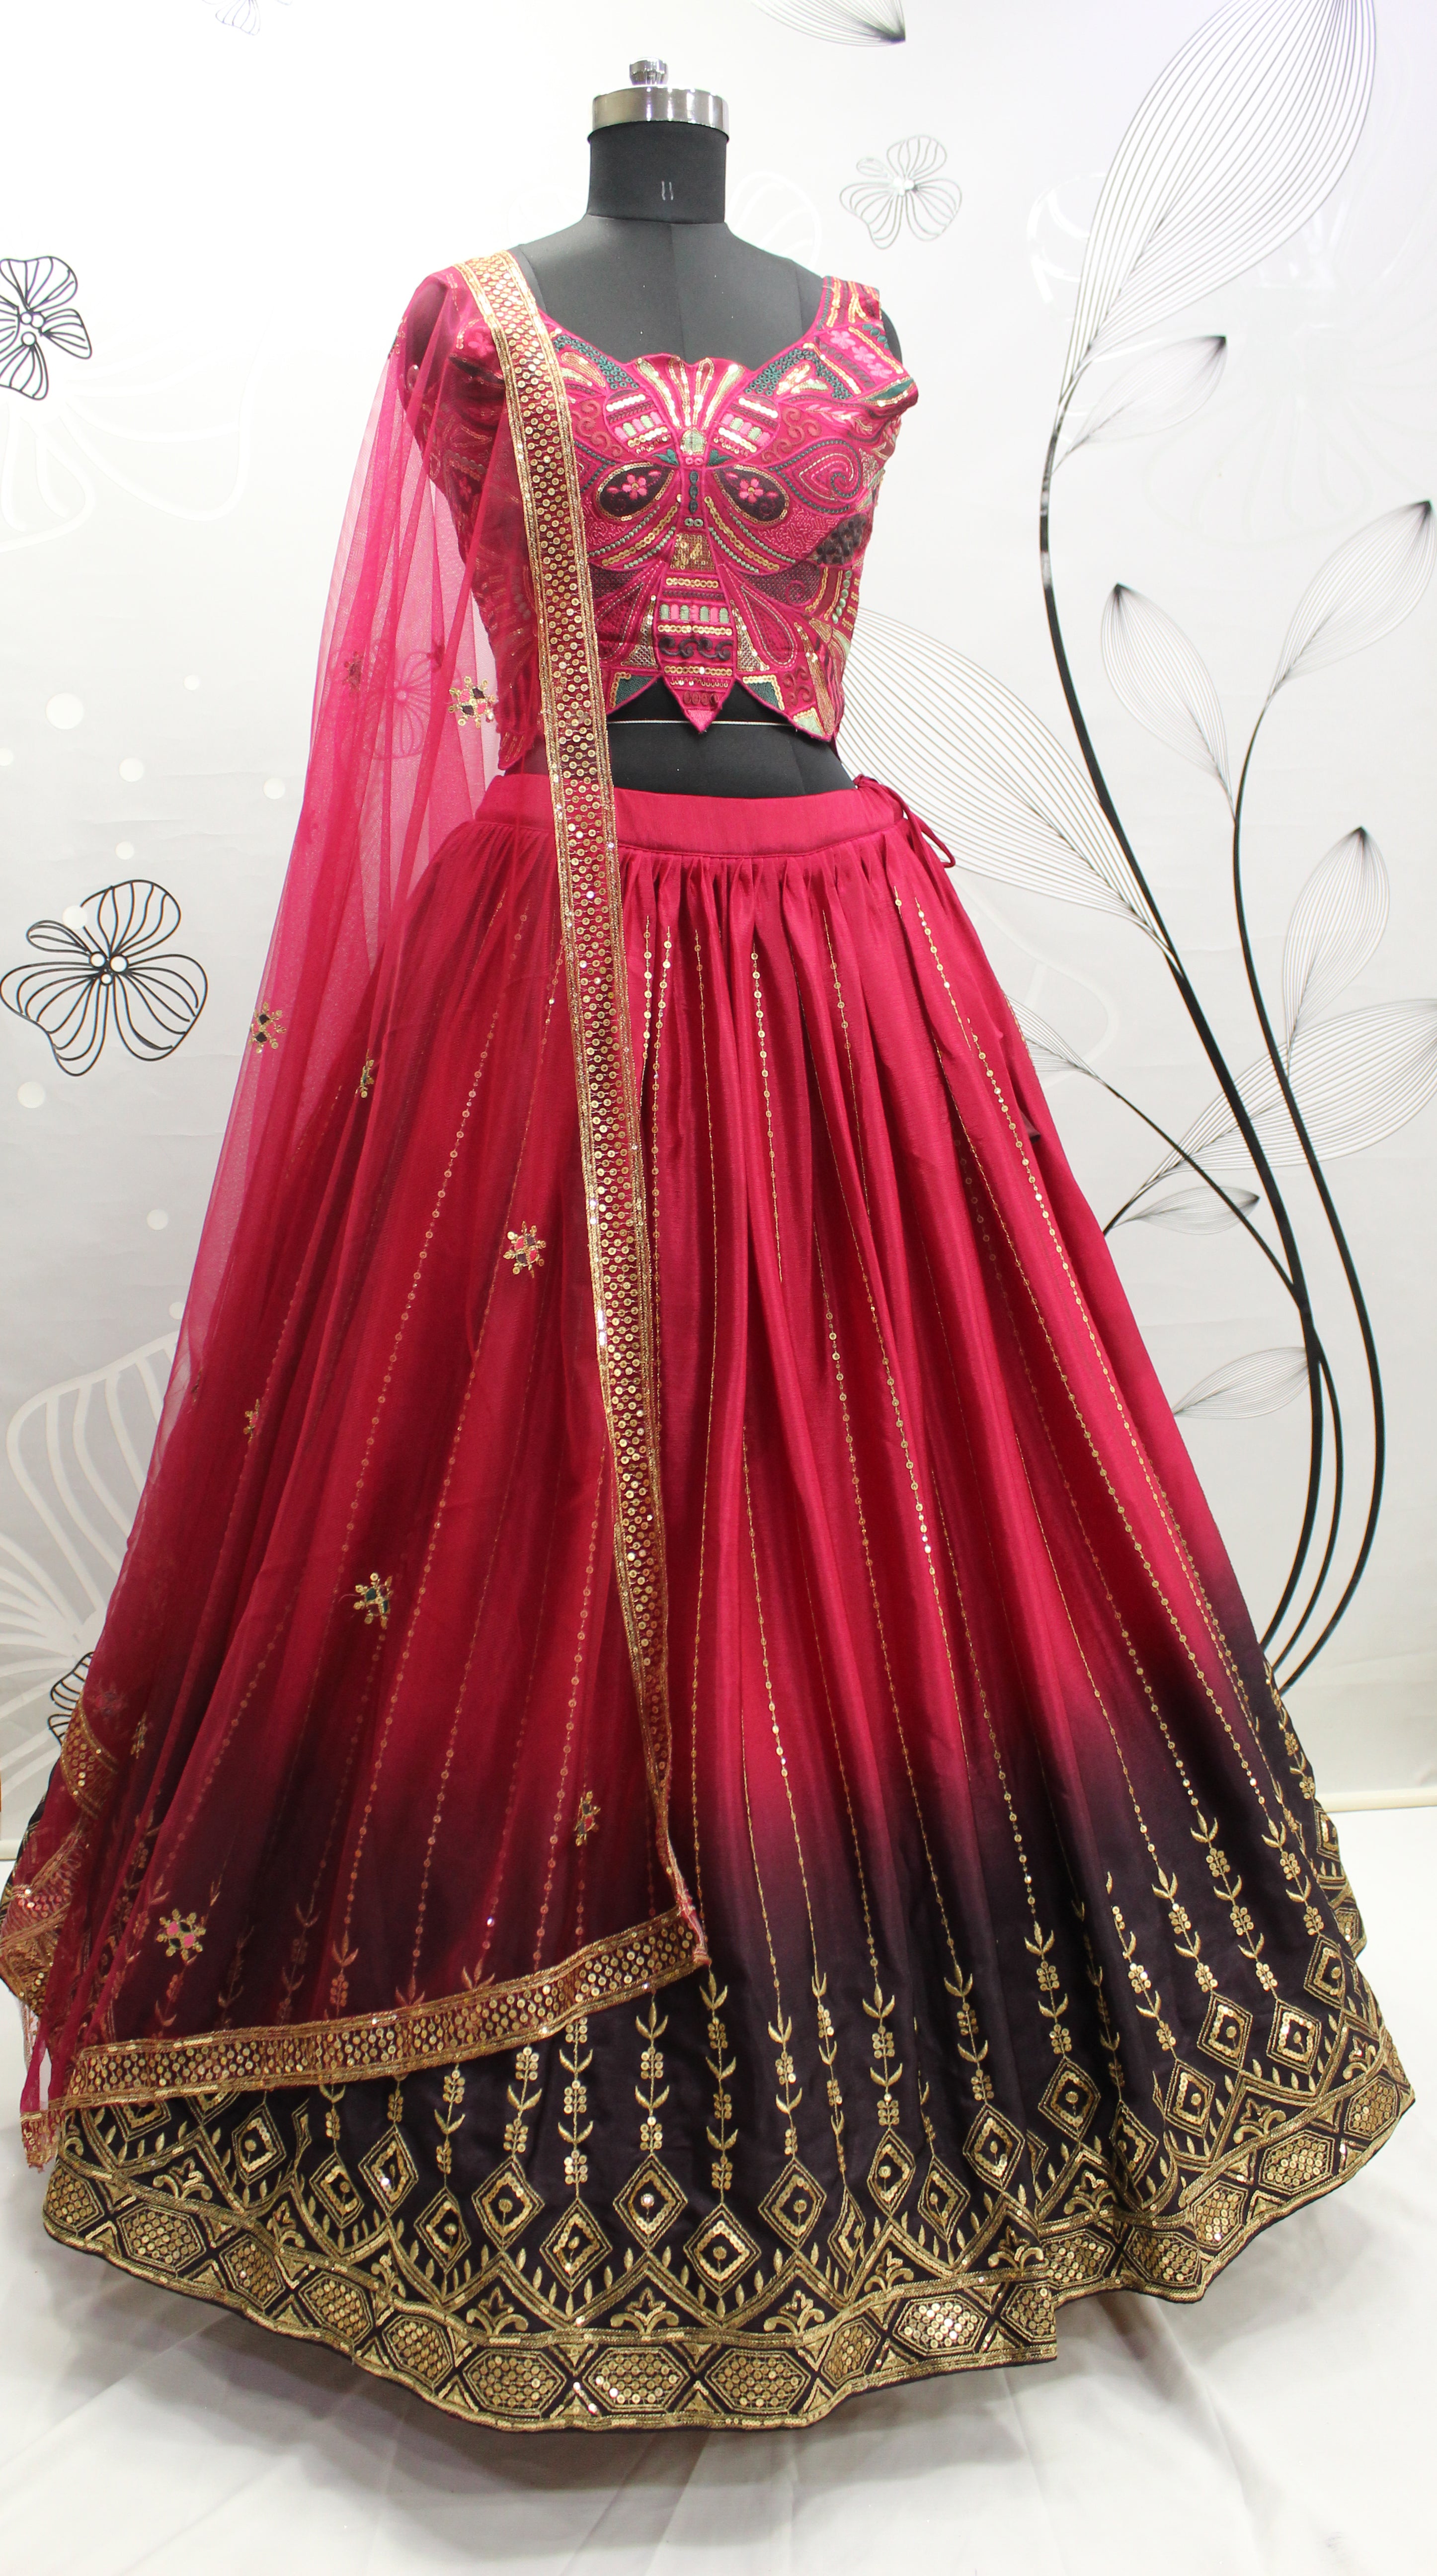 Fancy Satin Lehenga Choli For Women Fabric: Satin Type: Semi StitchedWaist:  28.0 - 38.0 (in inches)Bust: 38.0 - 44.0 (in inches)Within 6-8 business  days However, to find out an actual date of